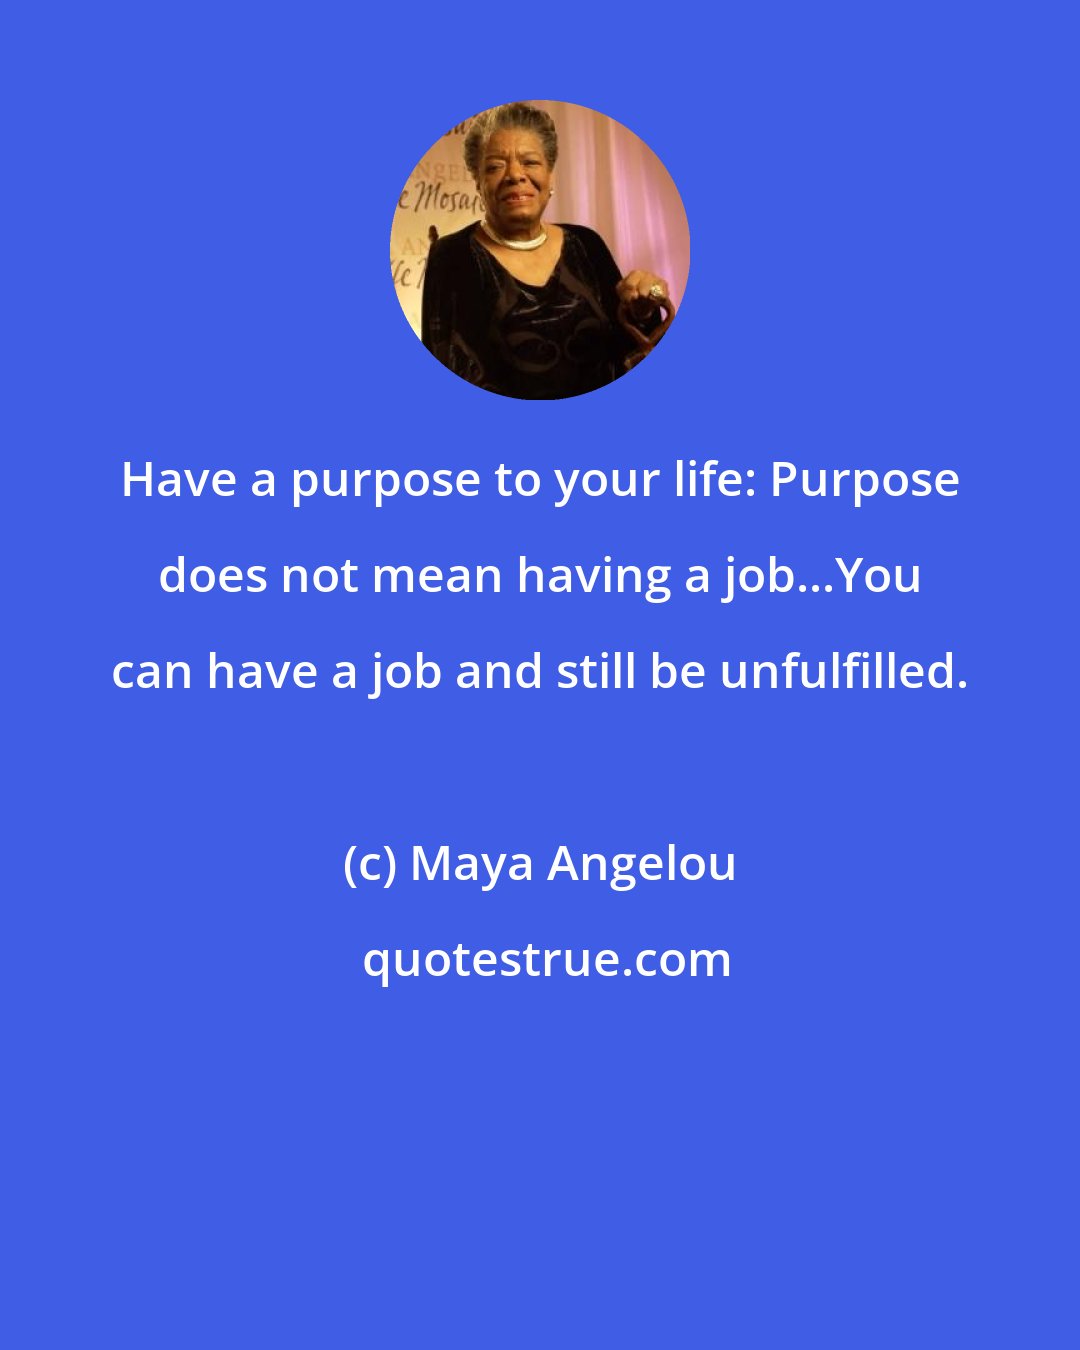 Maya Angelou: Have a purpose to your life: Purpose does not mean having a job...You can have a job and still be unfulfilled.